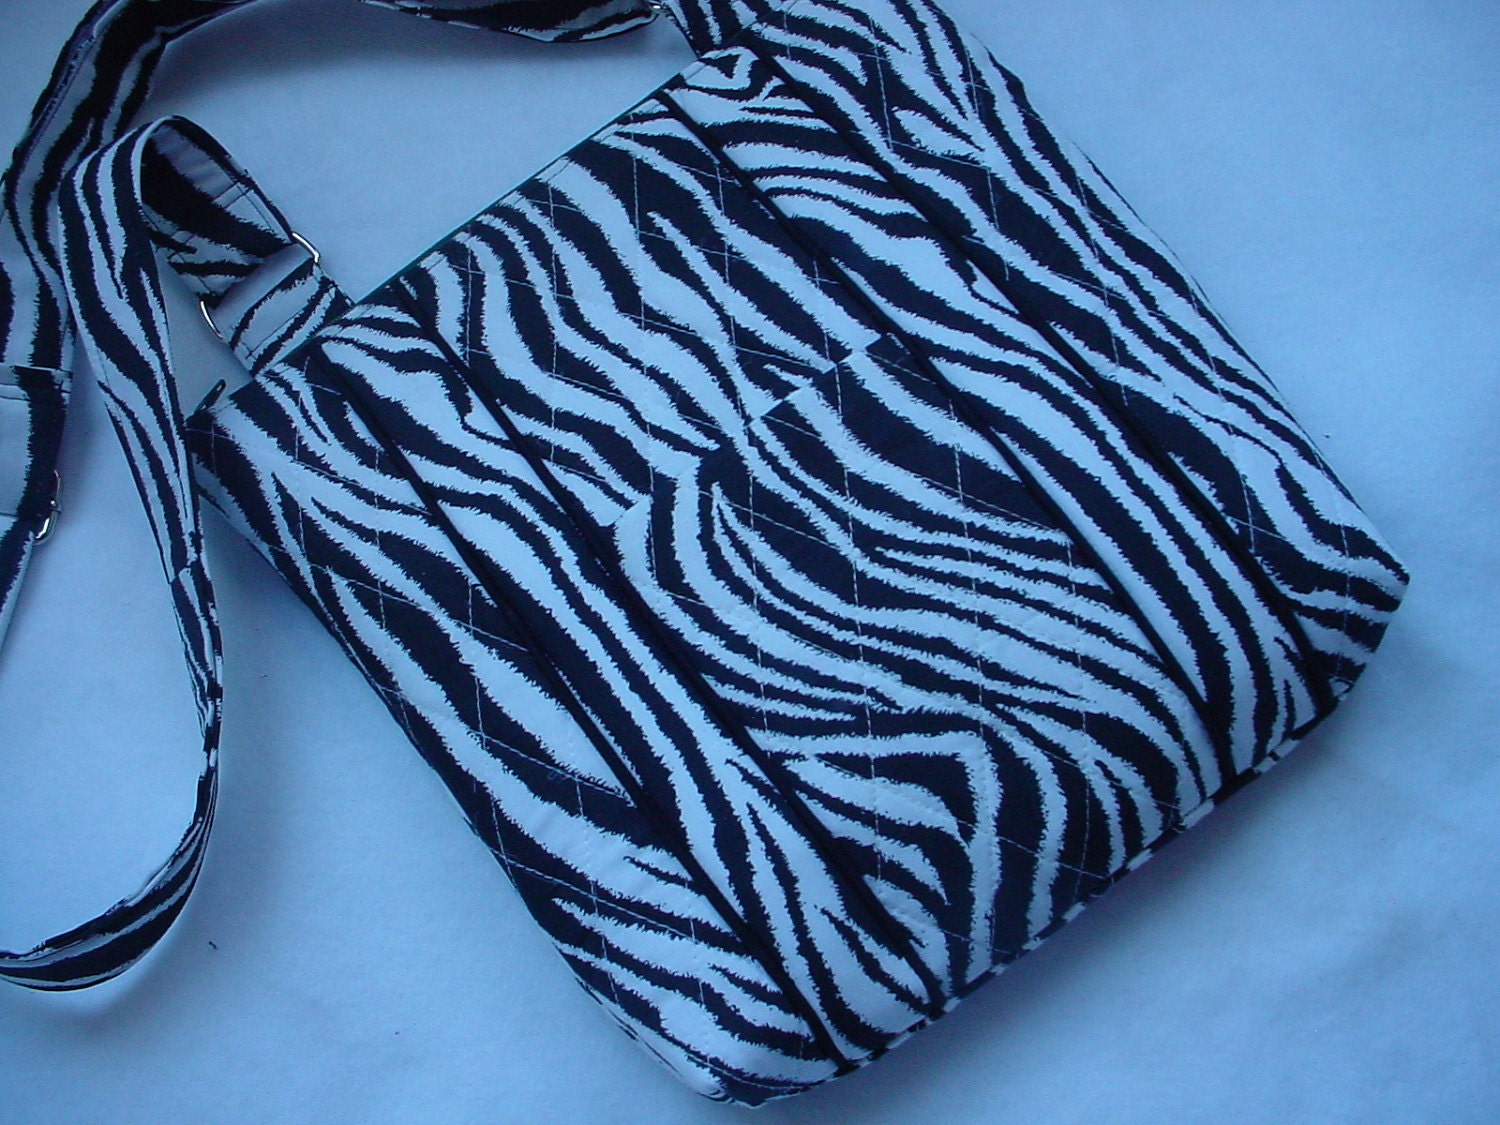 Vera Bradley style quilted Hipster in Zebra print